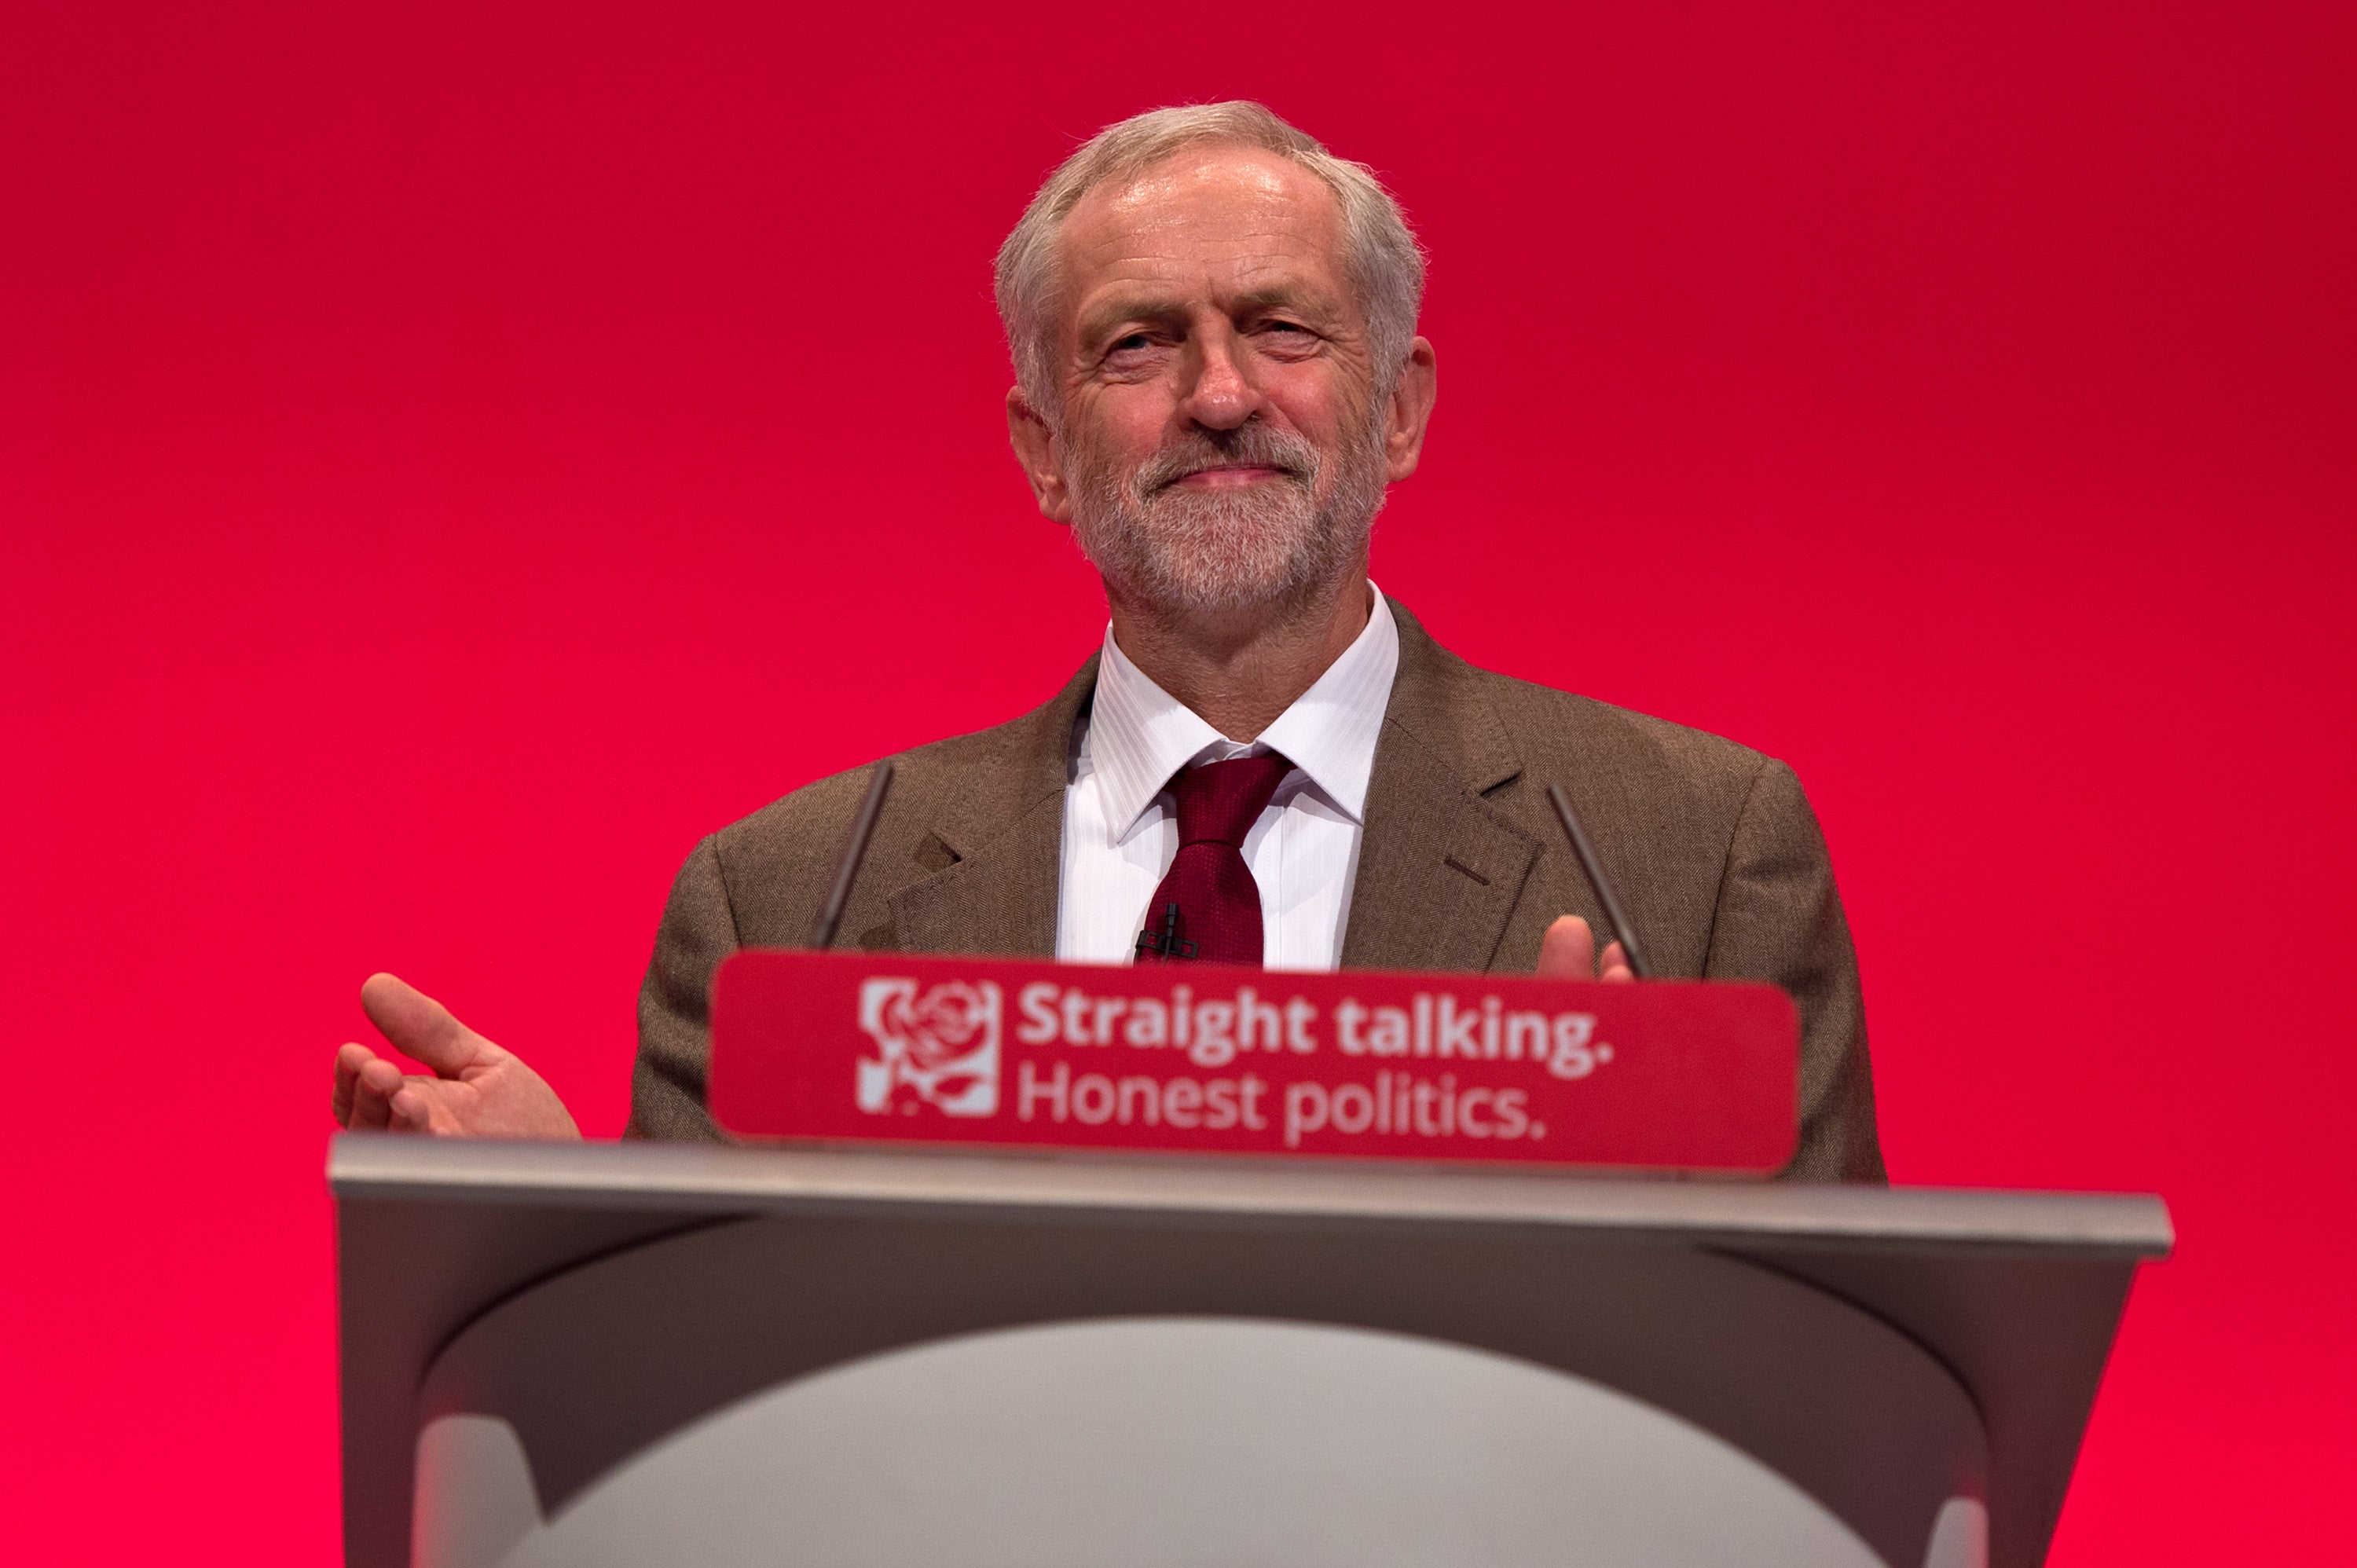 Jeremy Corbyn addresses the Labour conference in Brighton